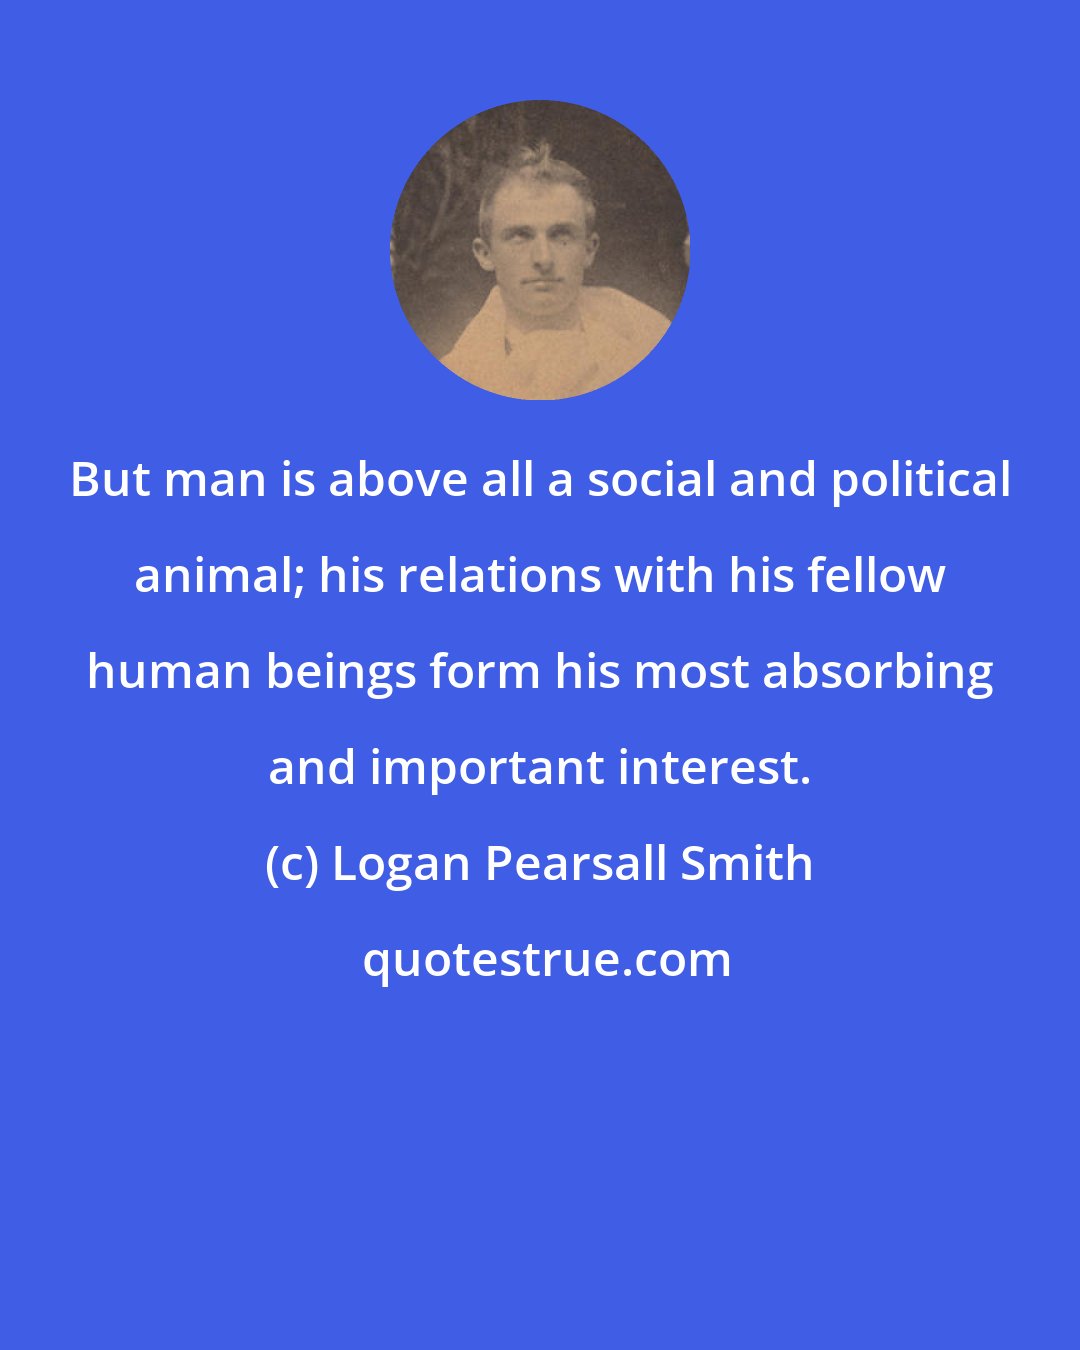 Logan Pearsall Smith: But man is above all a social and political animal; his relations with his fellow human beings form his most absorbing and important interest.